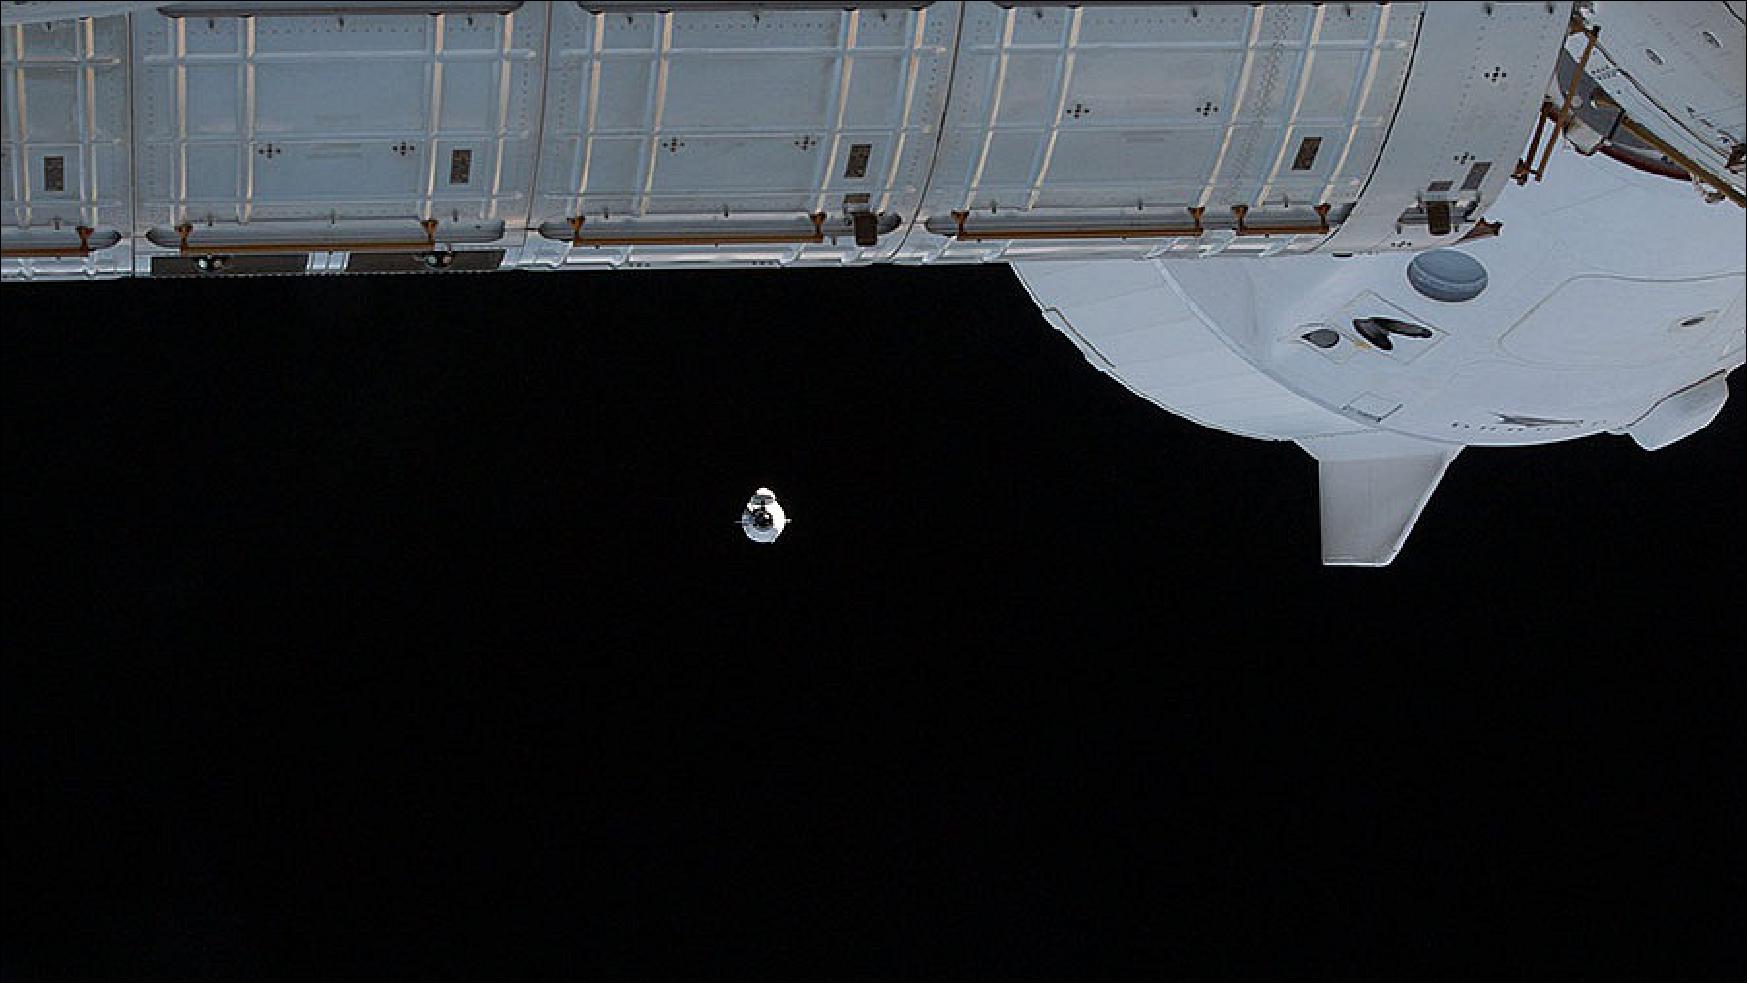 Figure 24: The SpaceX Cargo Dragon approaches the station on Dec. 22. The SpaceX Crew Dragon Endeavour can be seen docked to the Harmony module’s forward port (image credit: NASA TV)